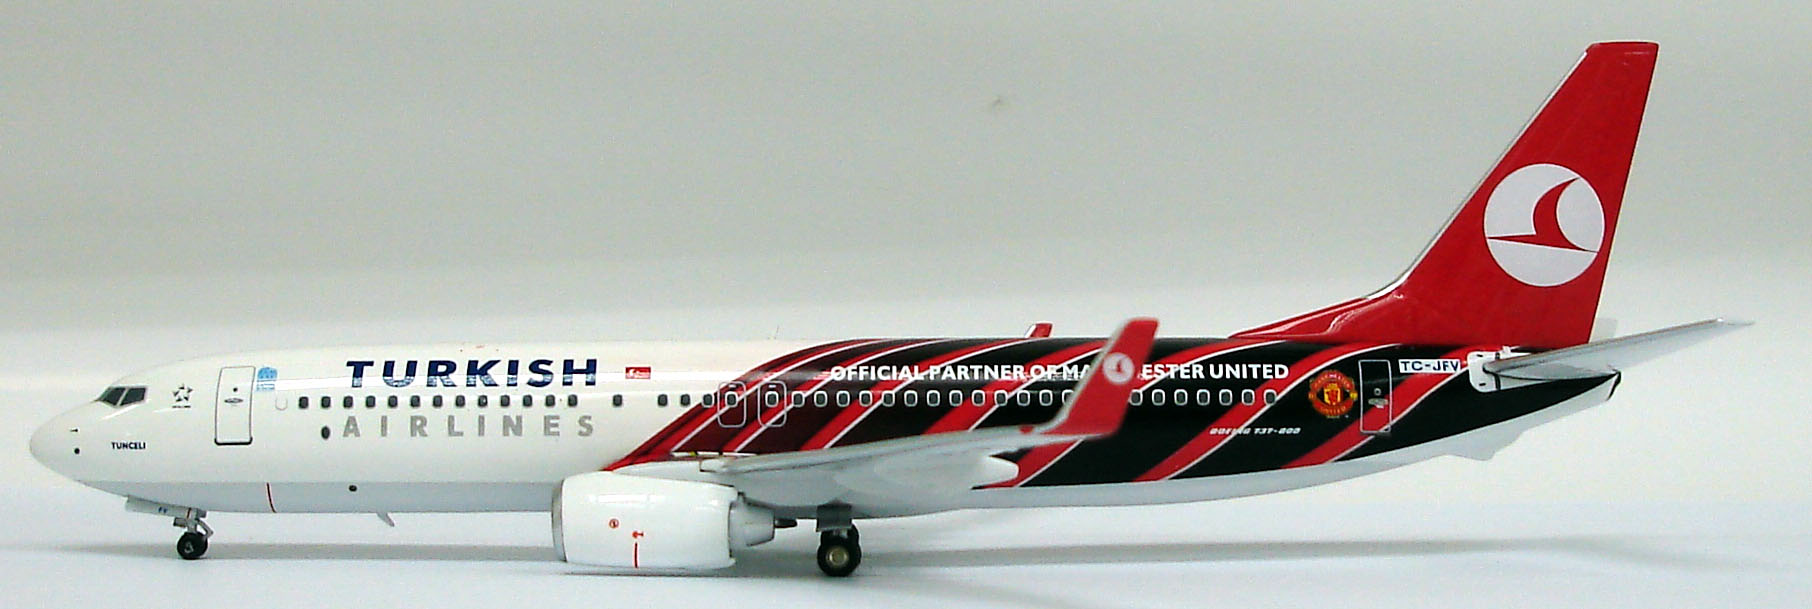 B737-8F2WL Turkish Airlines "Manchester FC" Colors